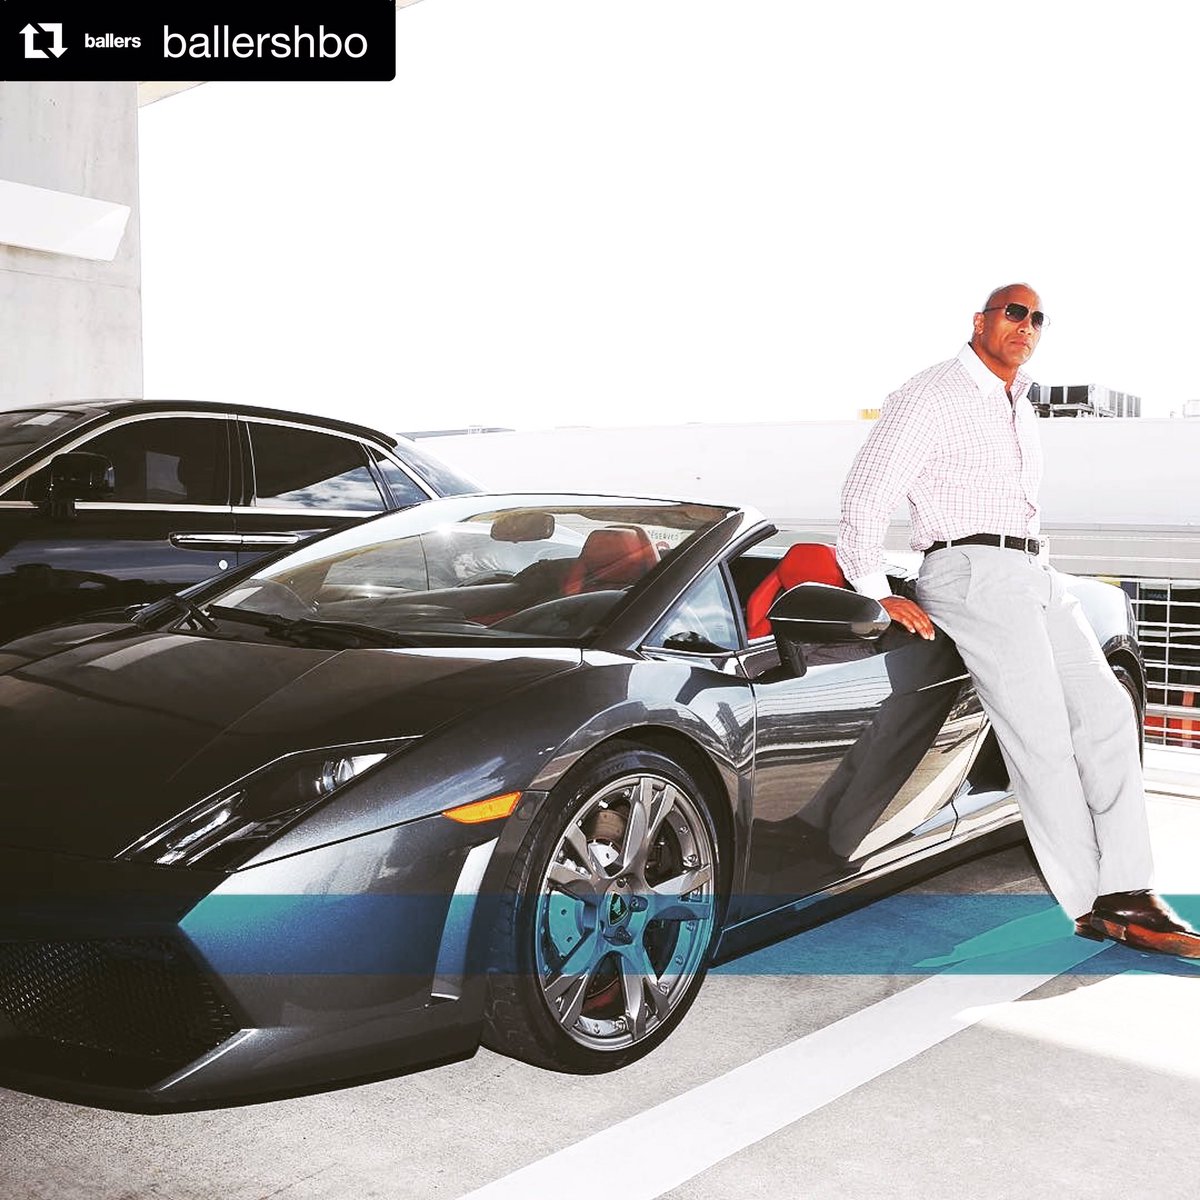 TONIGHT we're back.

@BallersHBO 10pm on @HBO.

And I still can't fit in these damn exotics. #BallOut ???? https://t.co/dzw5q9nncc